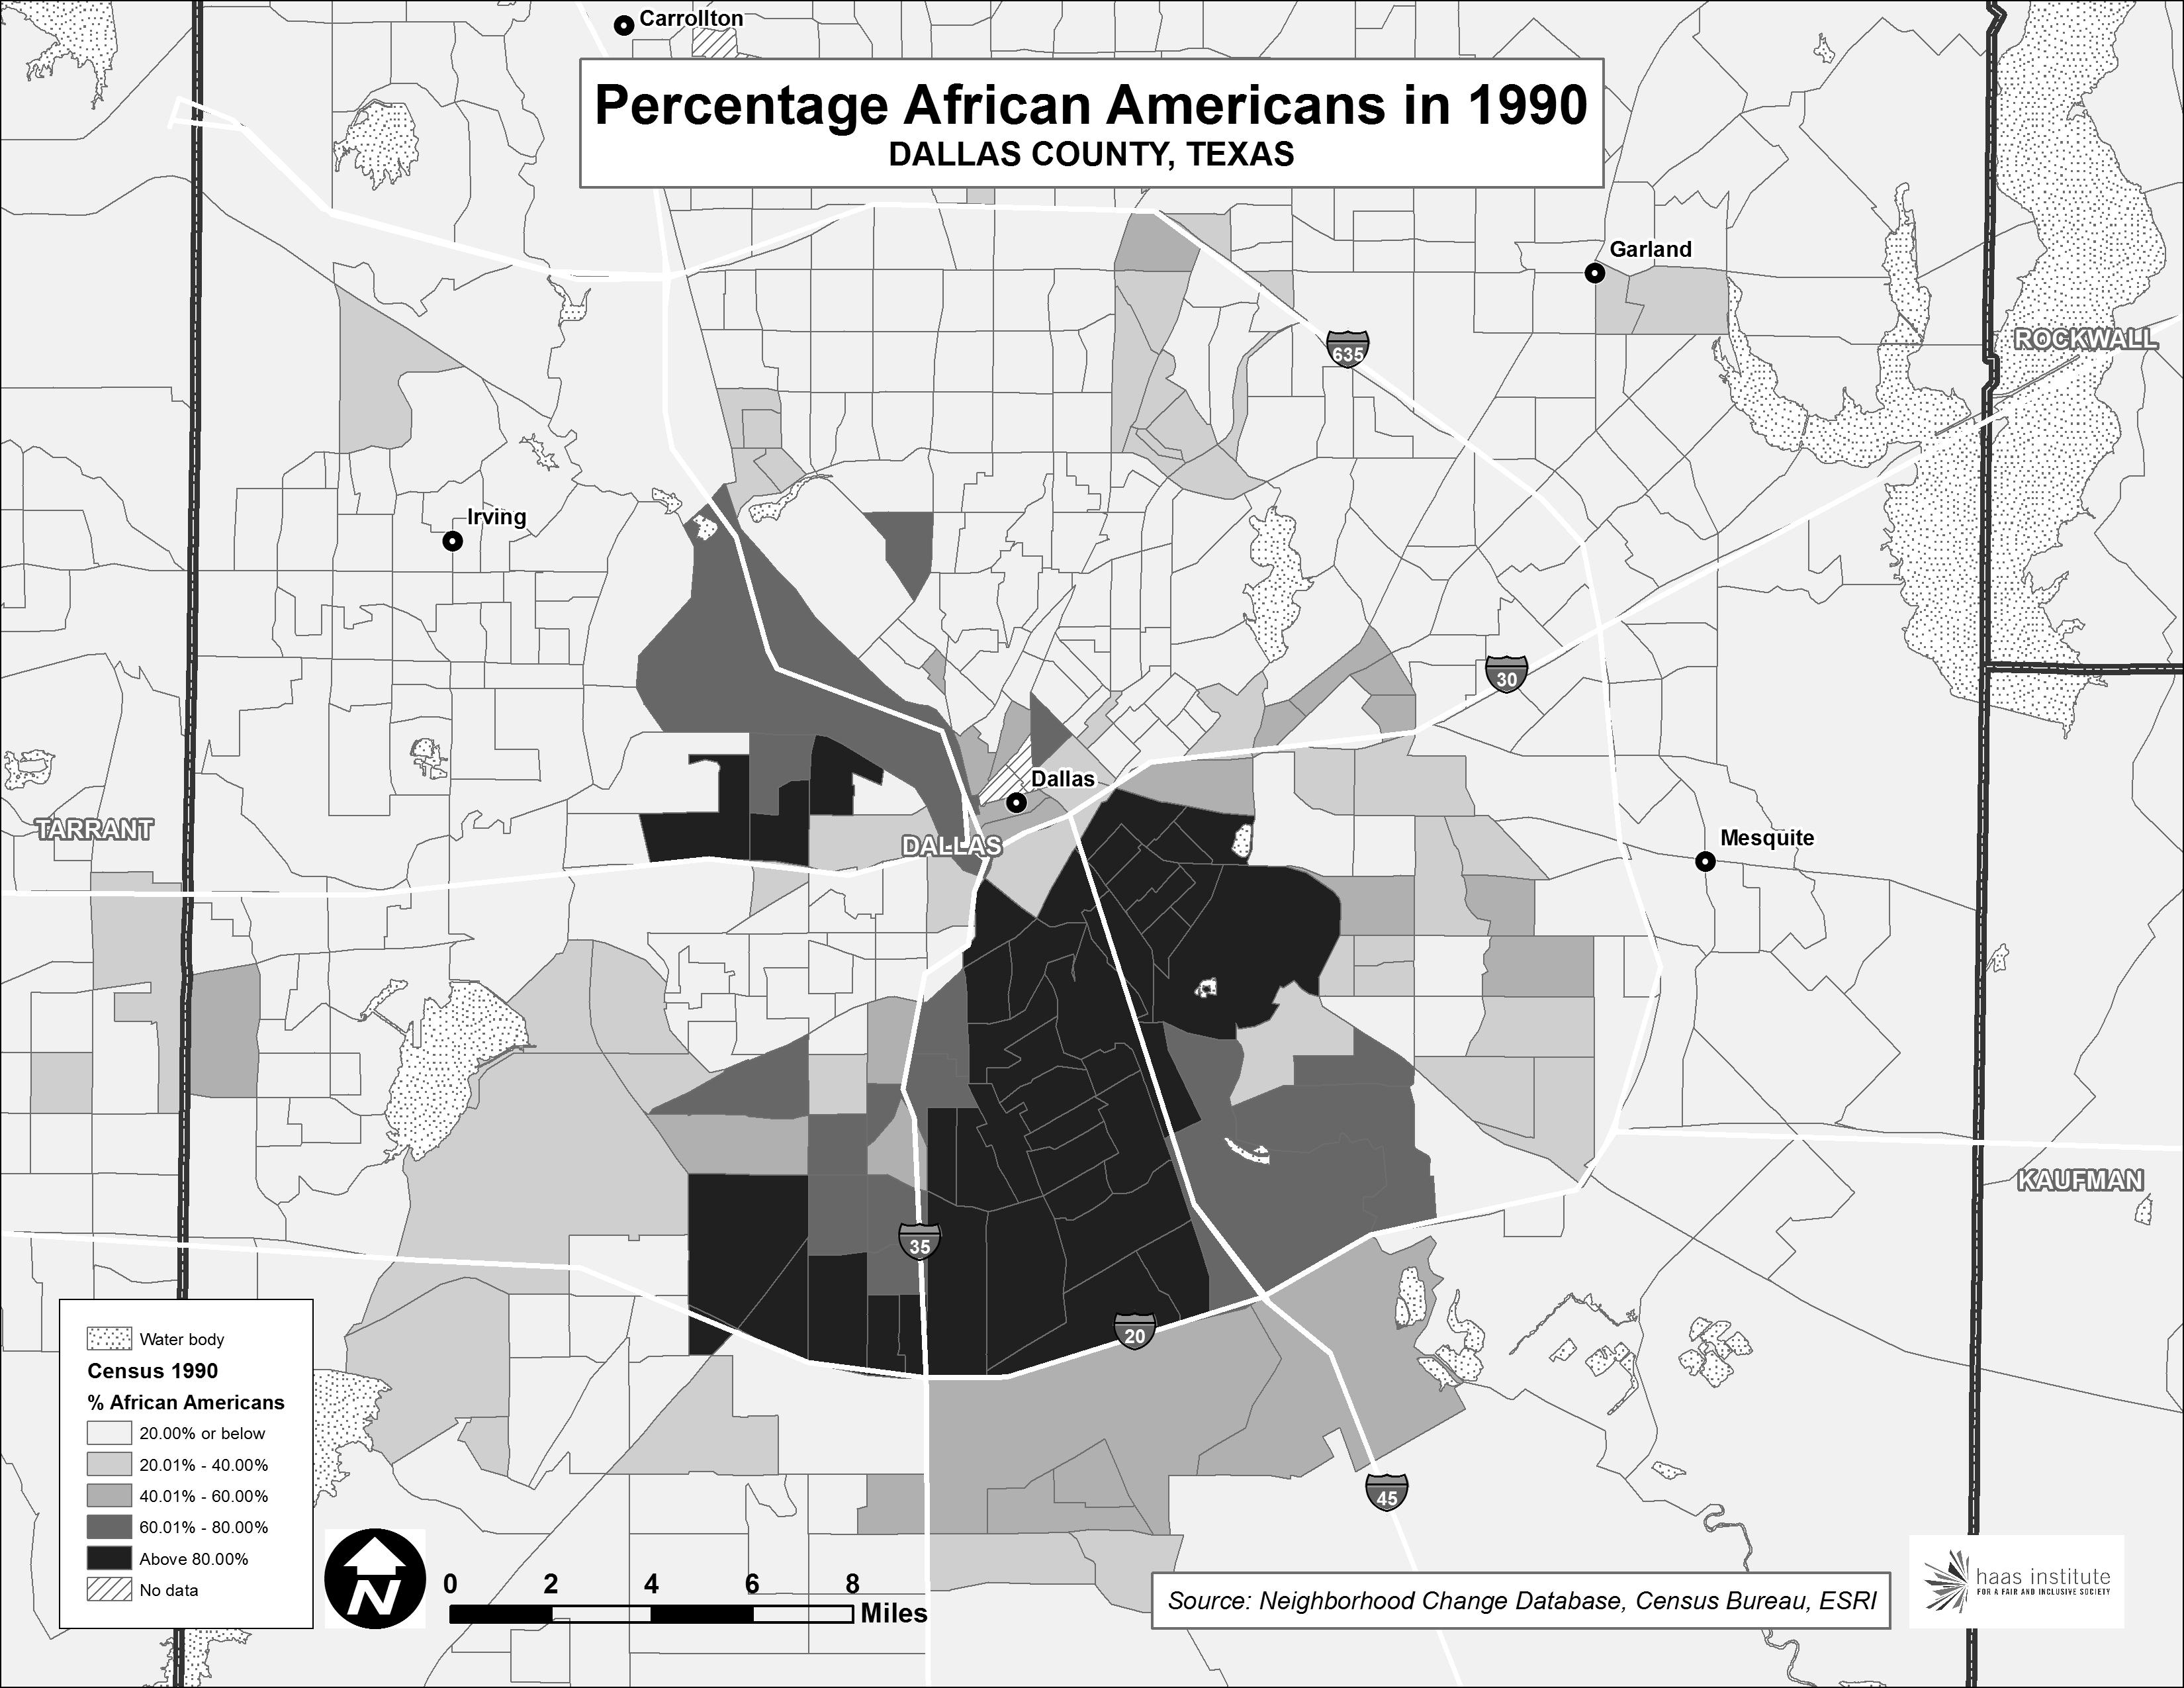 The percentage of African Americans, by census tract, in Dallas County, in 1990. 